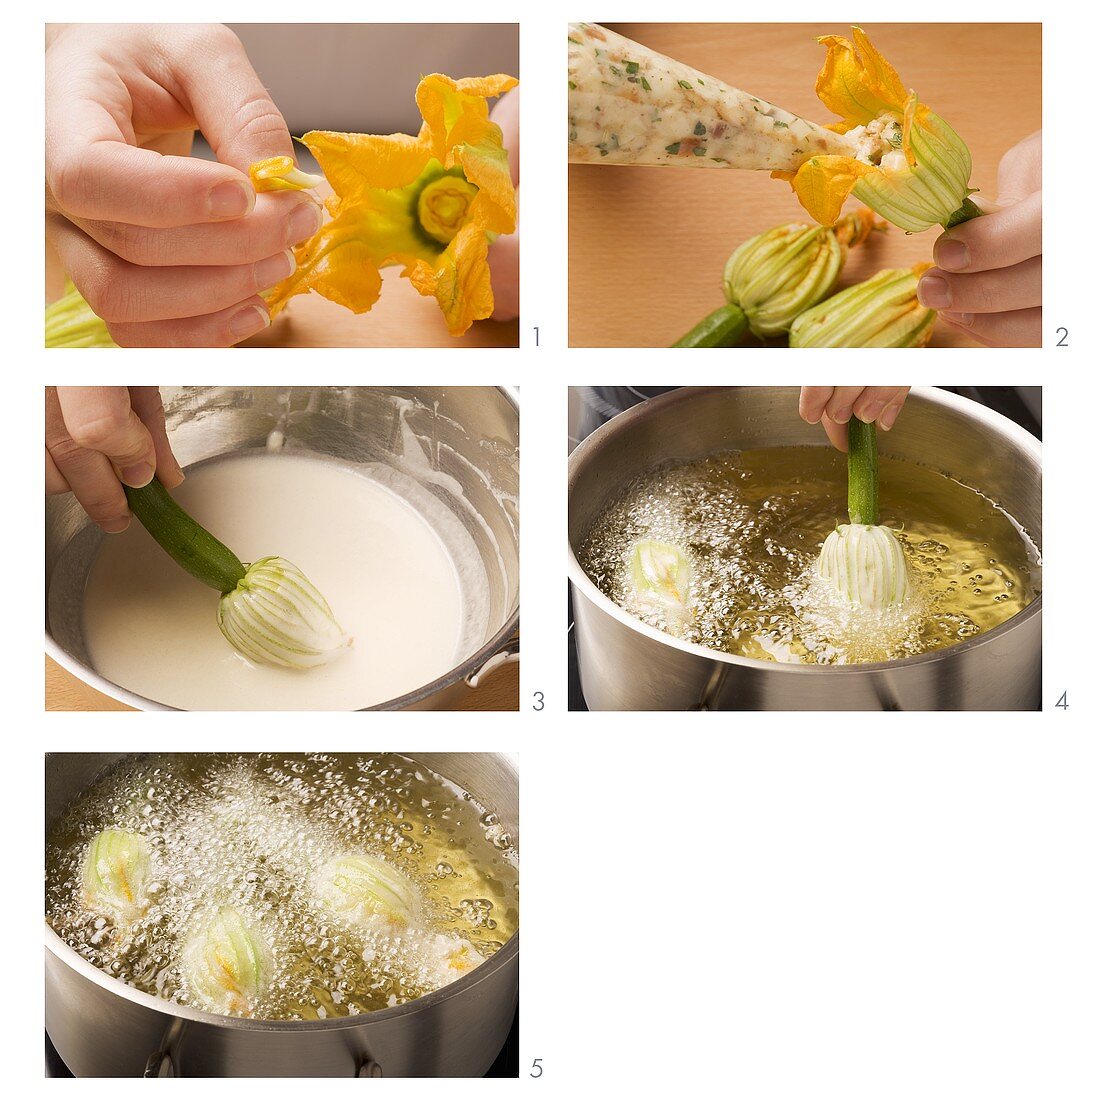 Suffed courgette flowers being prepared